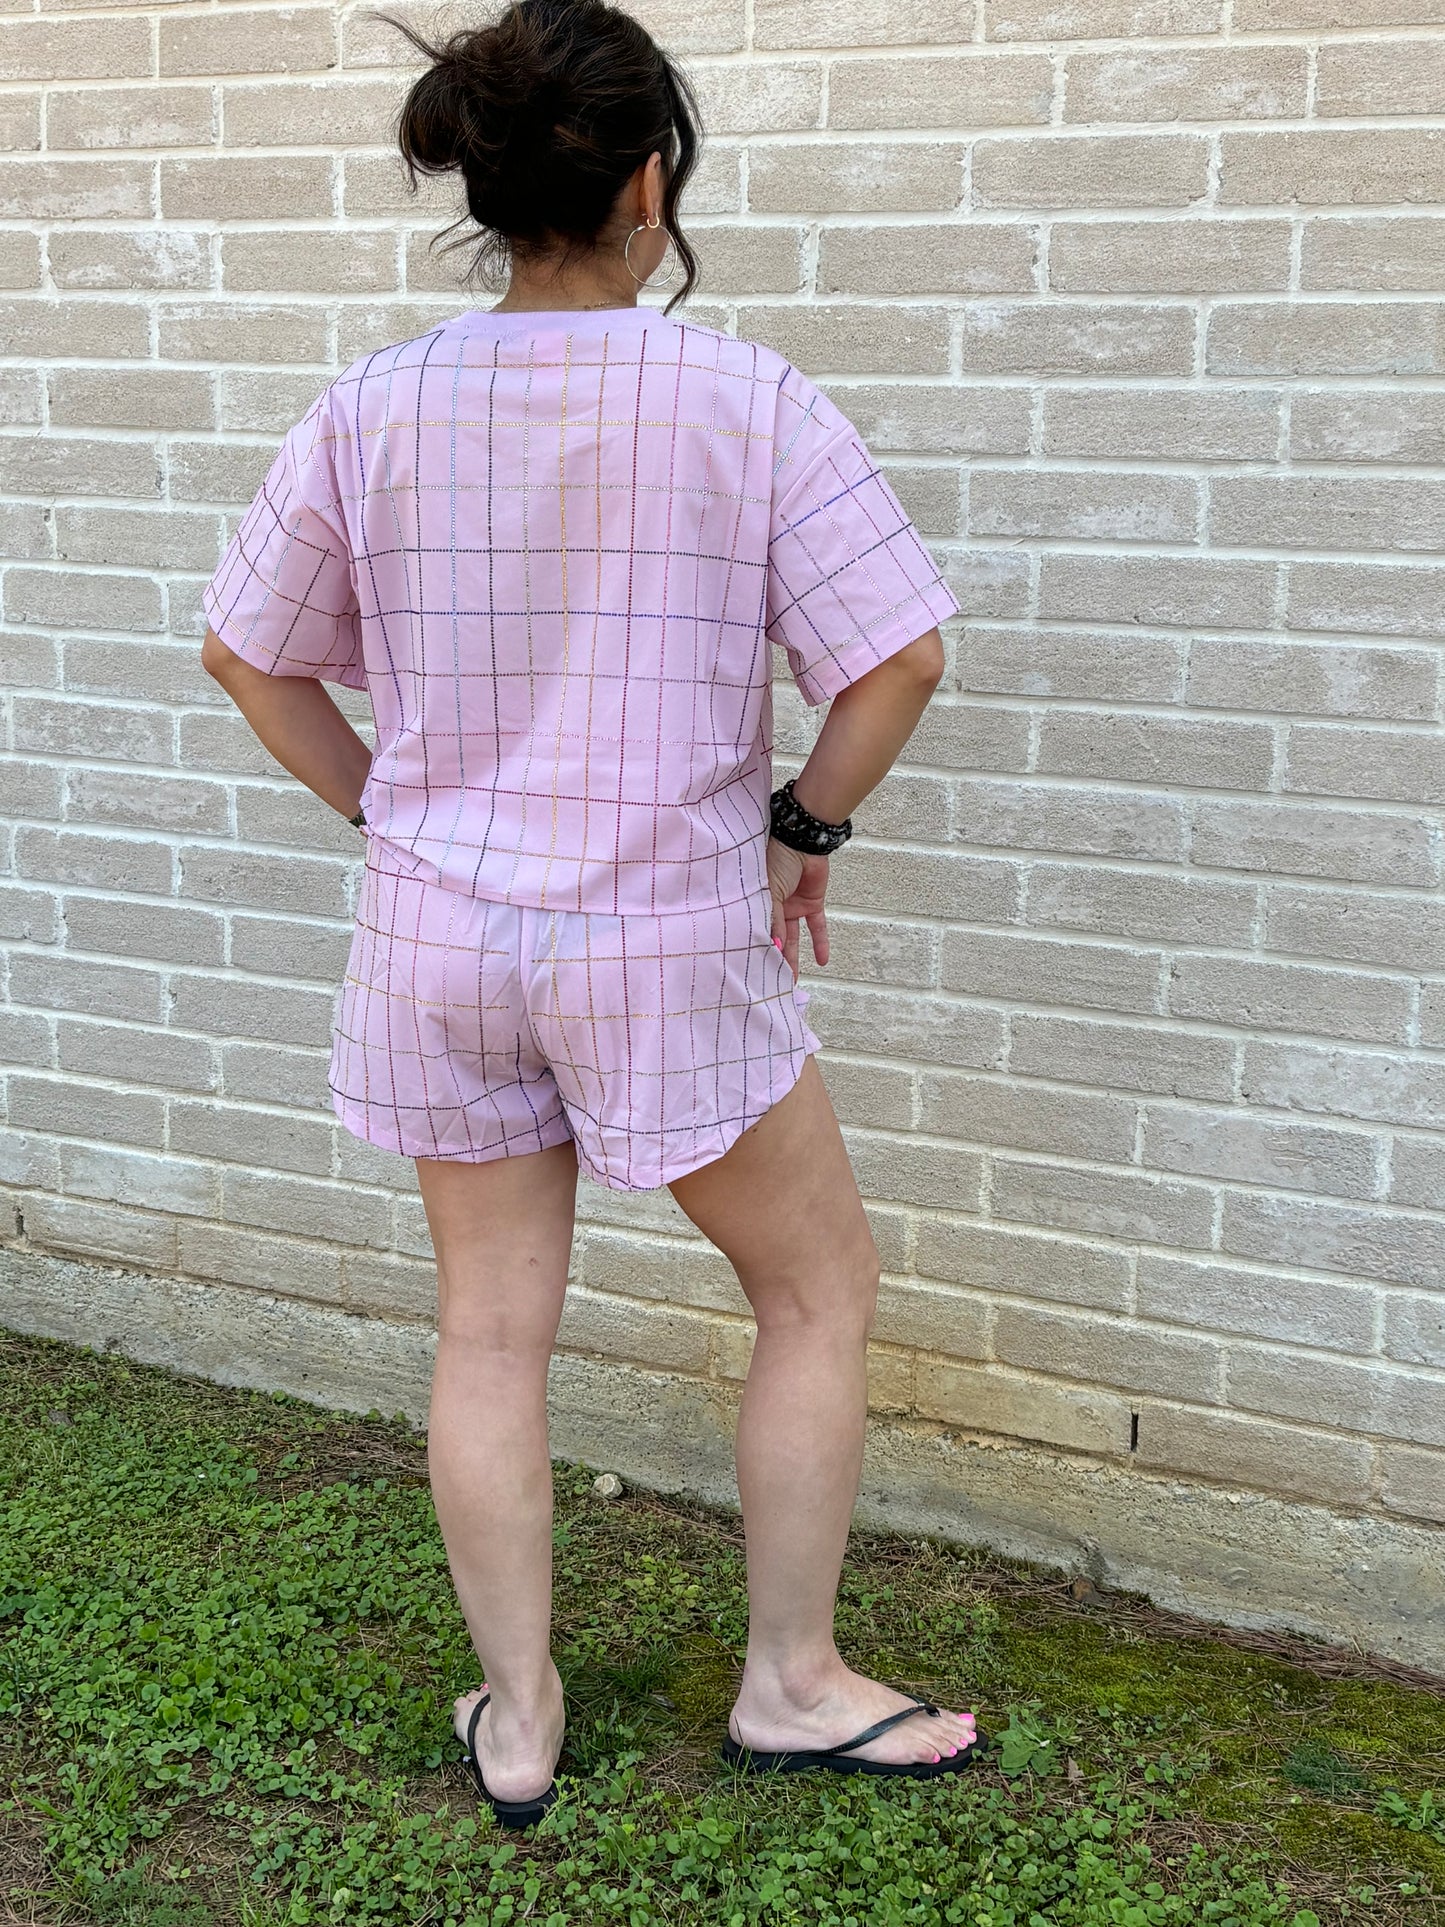 Queen of Sparkles Pink Rhinestone checkered shorts